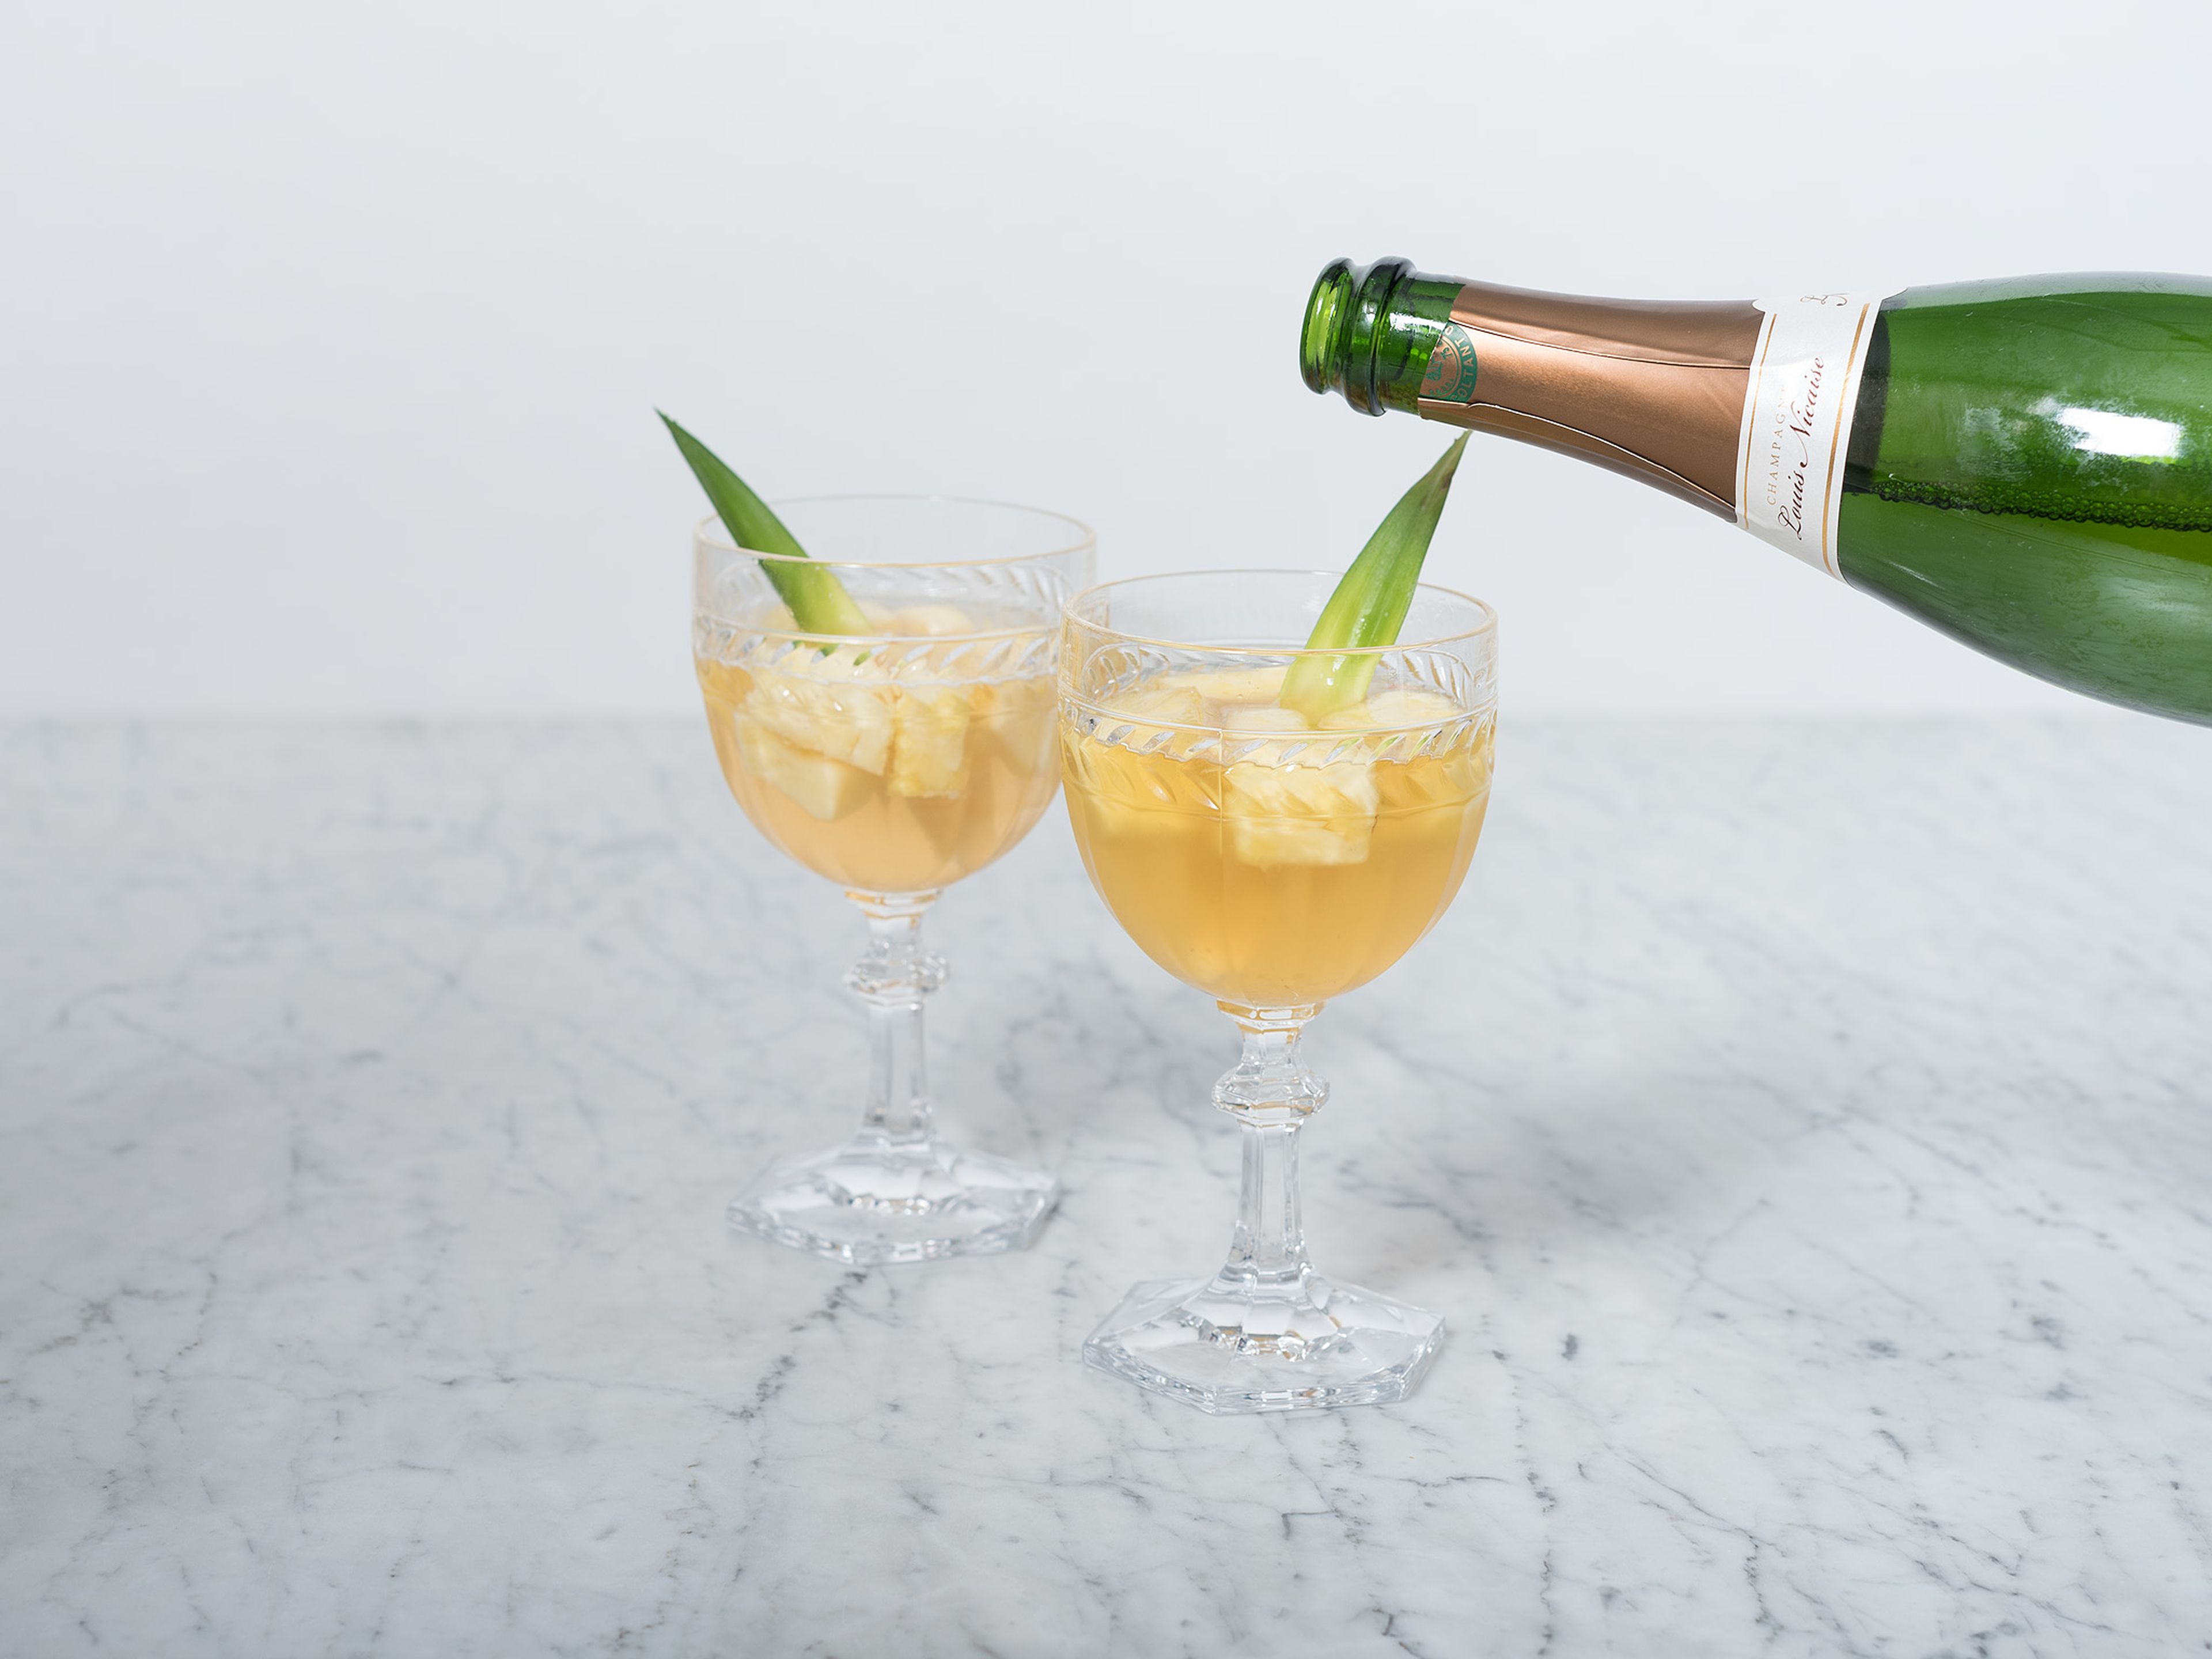 Serve in stemmed glasses, top with Champagne, and garnish with berries and pineapple leaves.  Enjoy!